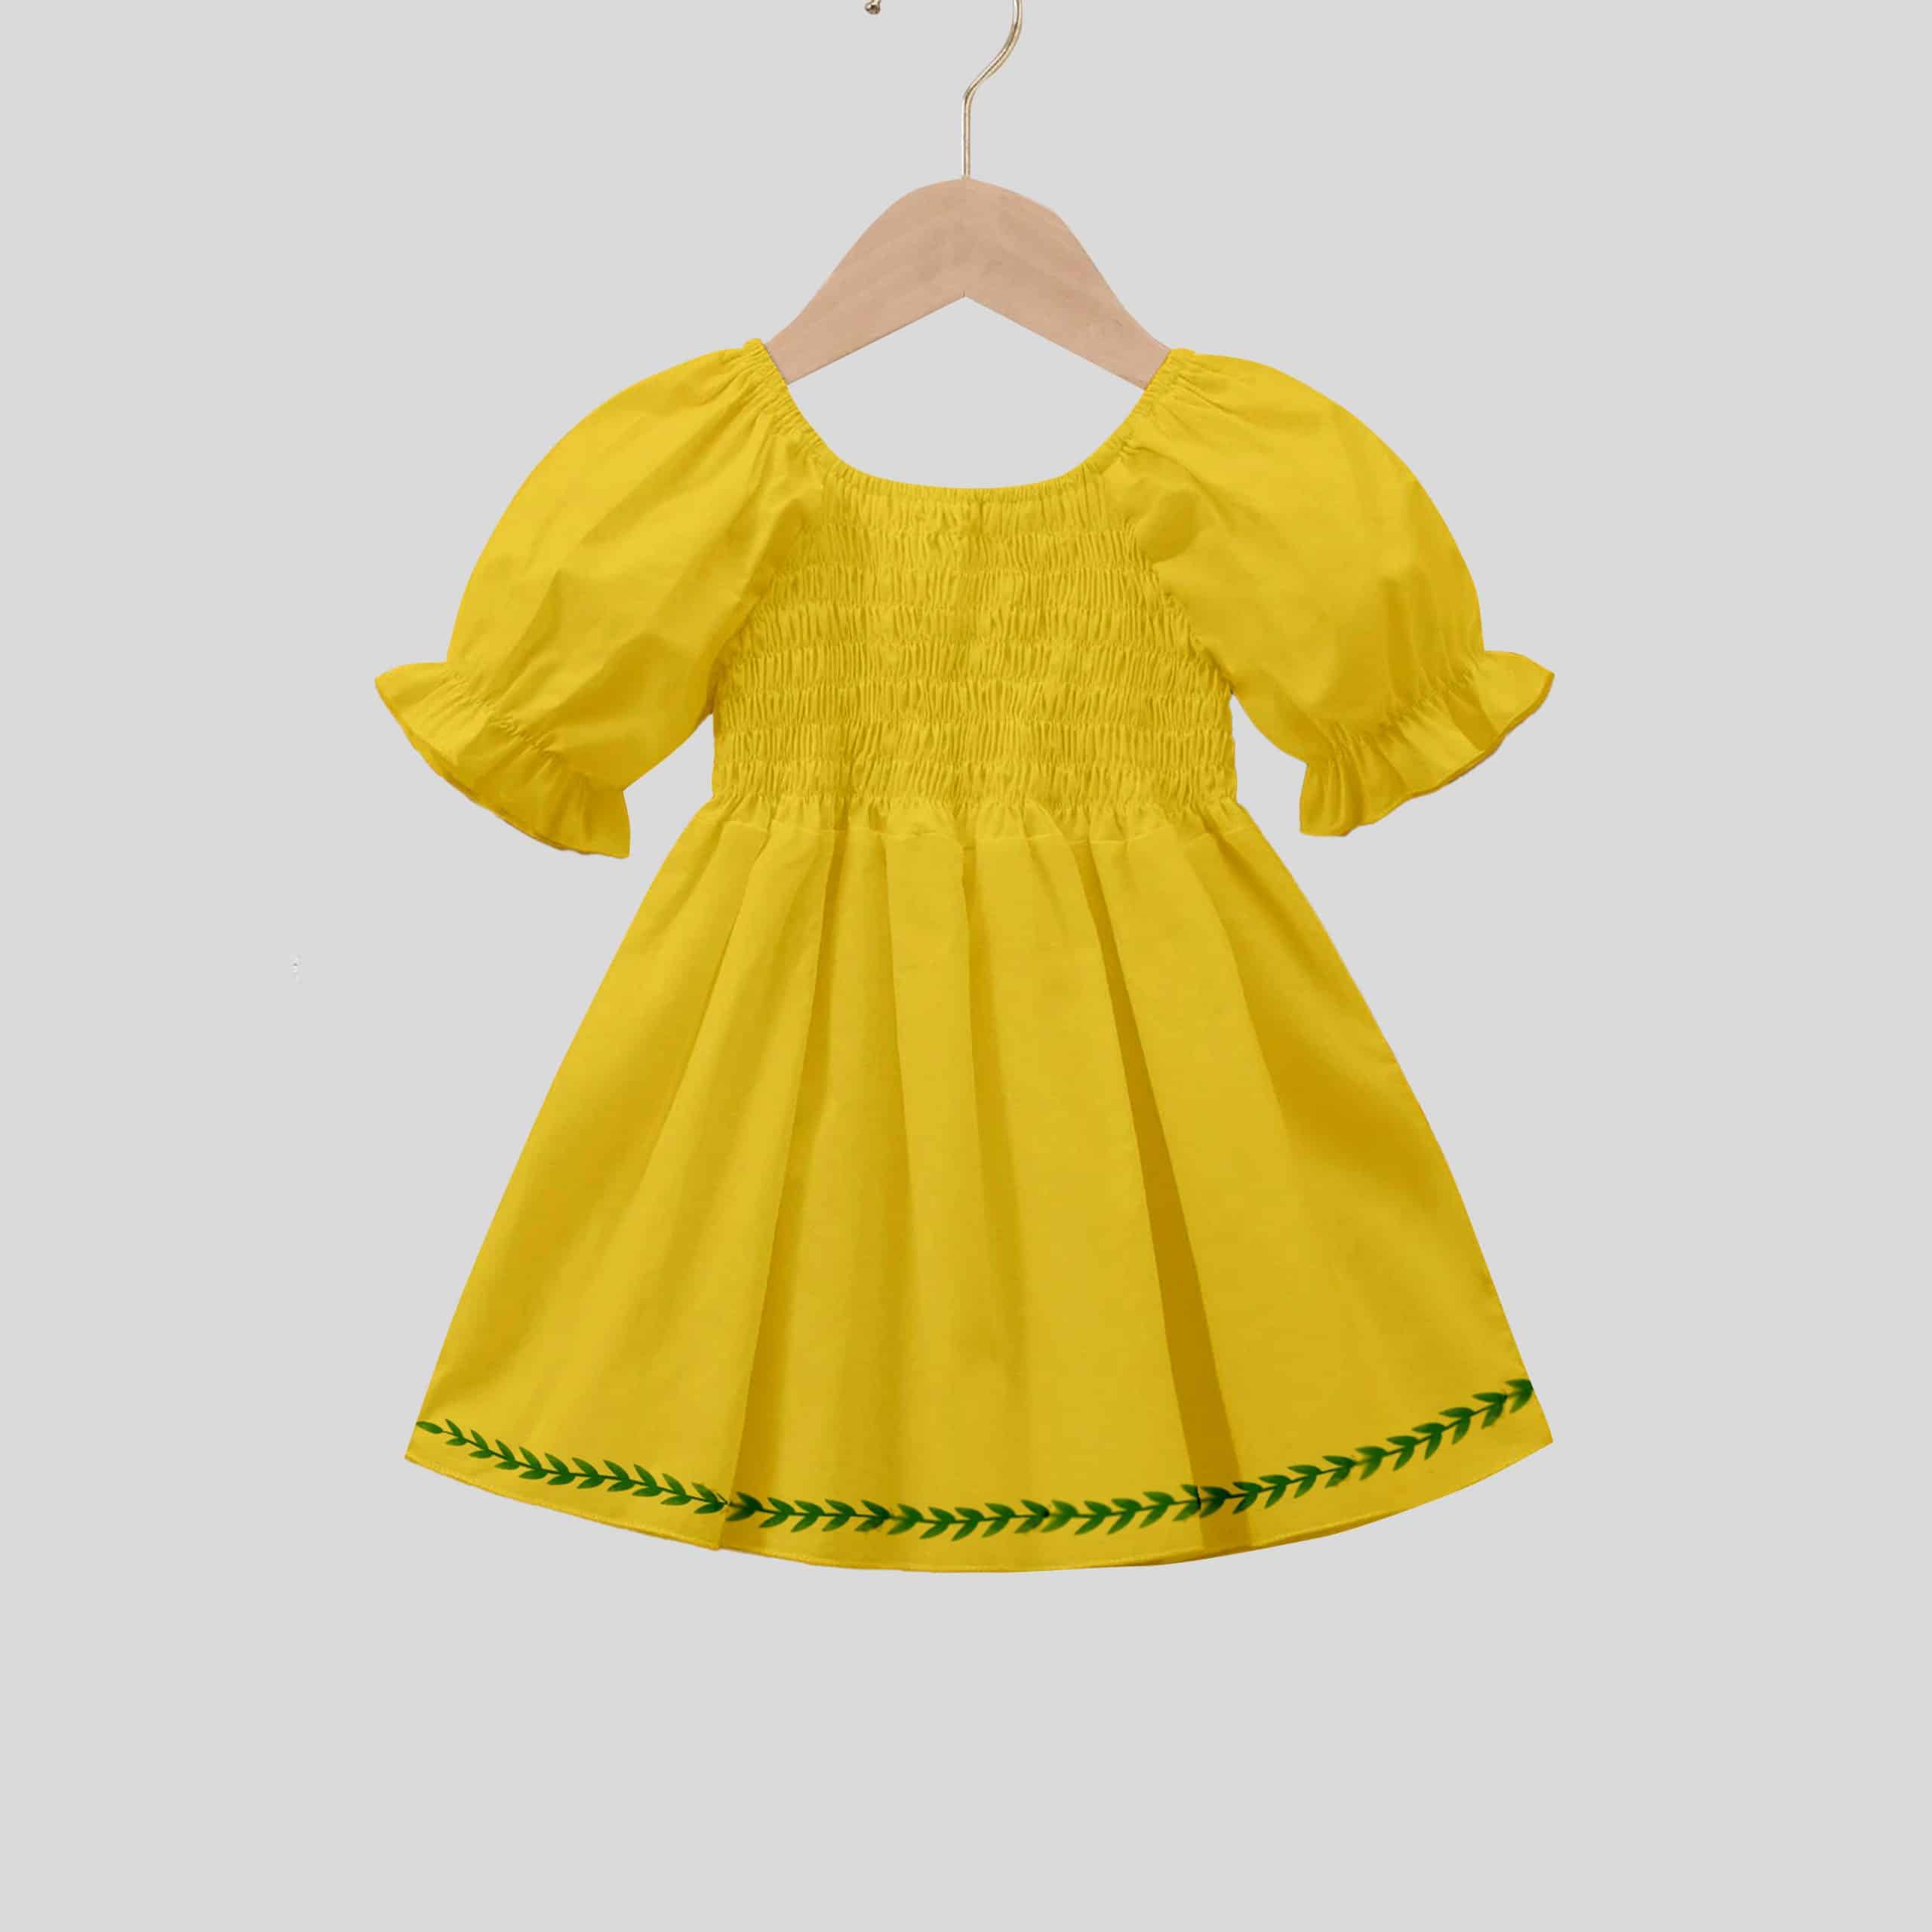 Girls yellow color dress with puff sleeve - RKFCW154